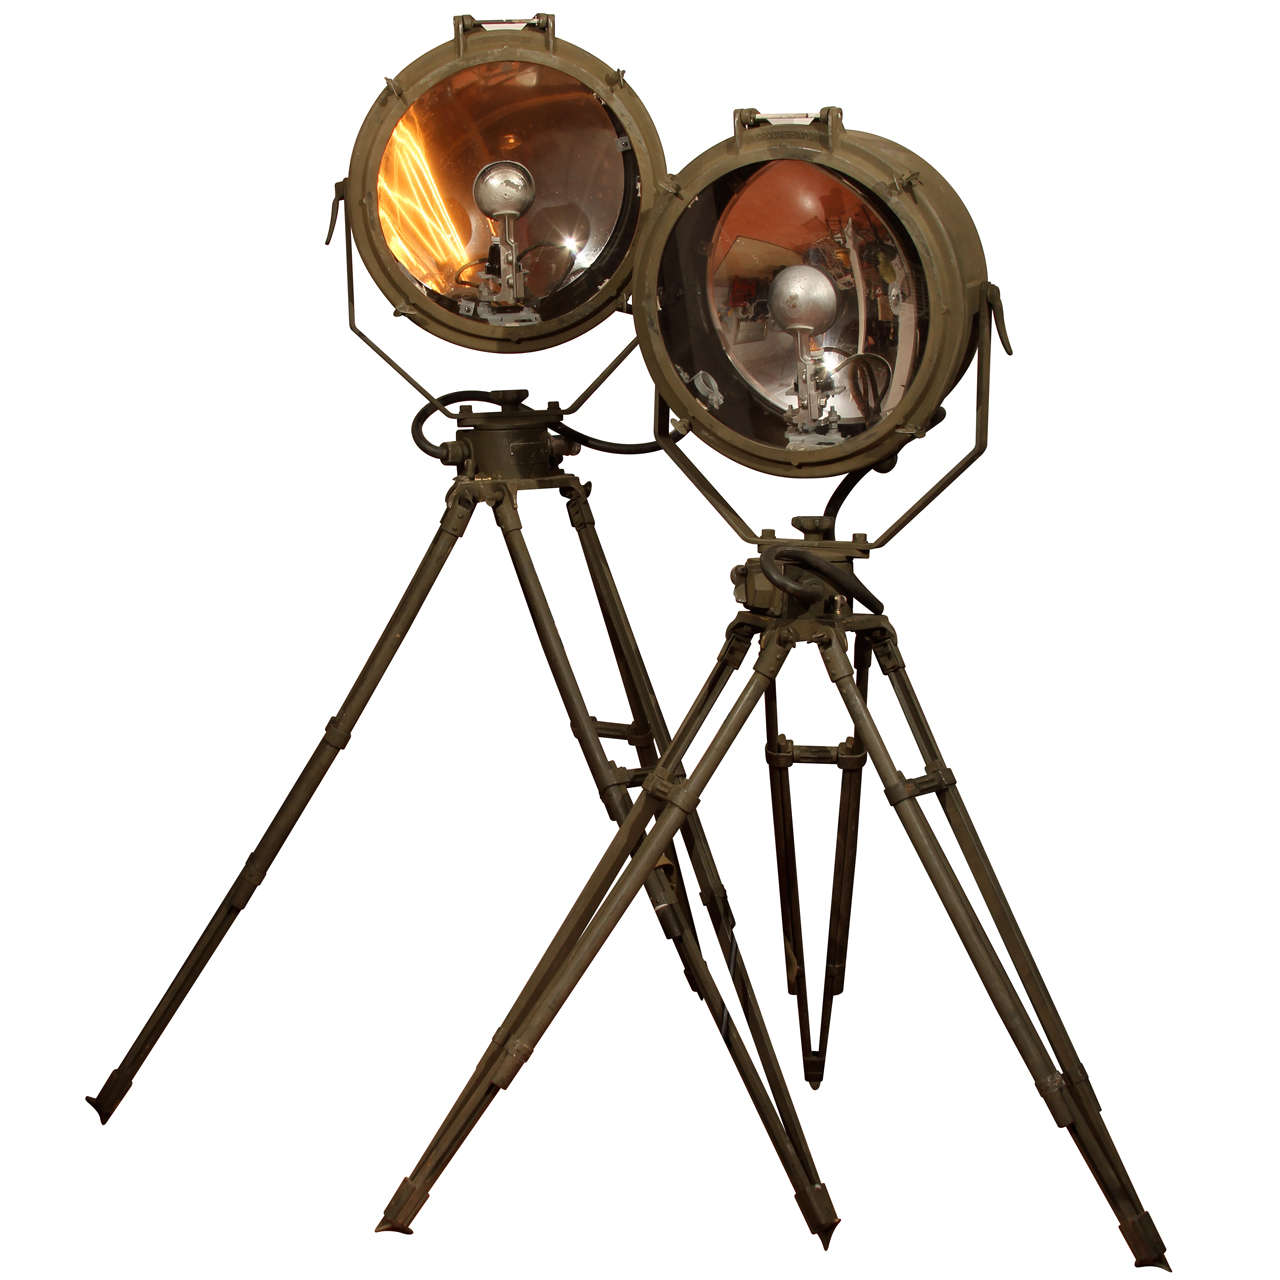 1943 WWII Crouse-Hinds Military Searchlights